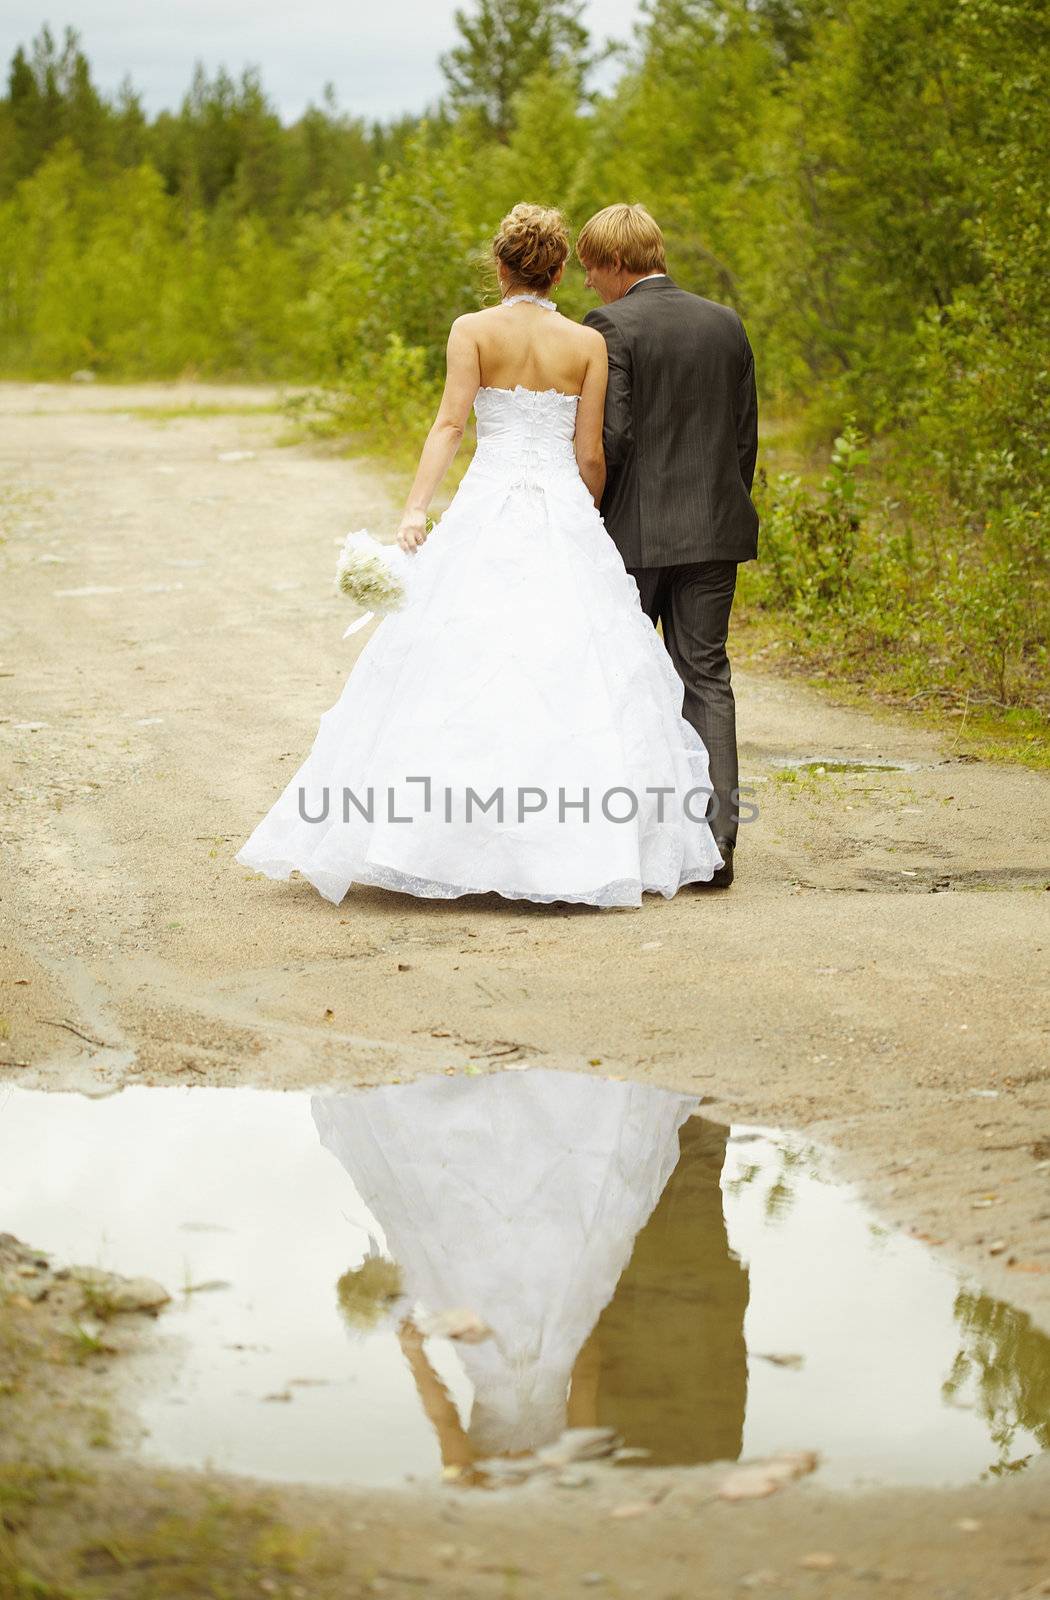 Newly-married couple walks on rural road by pzaxe